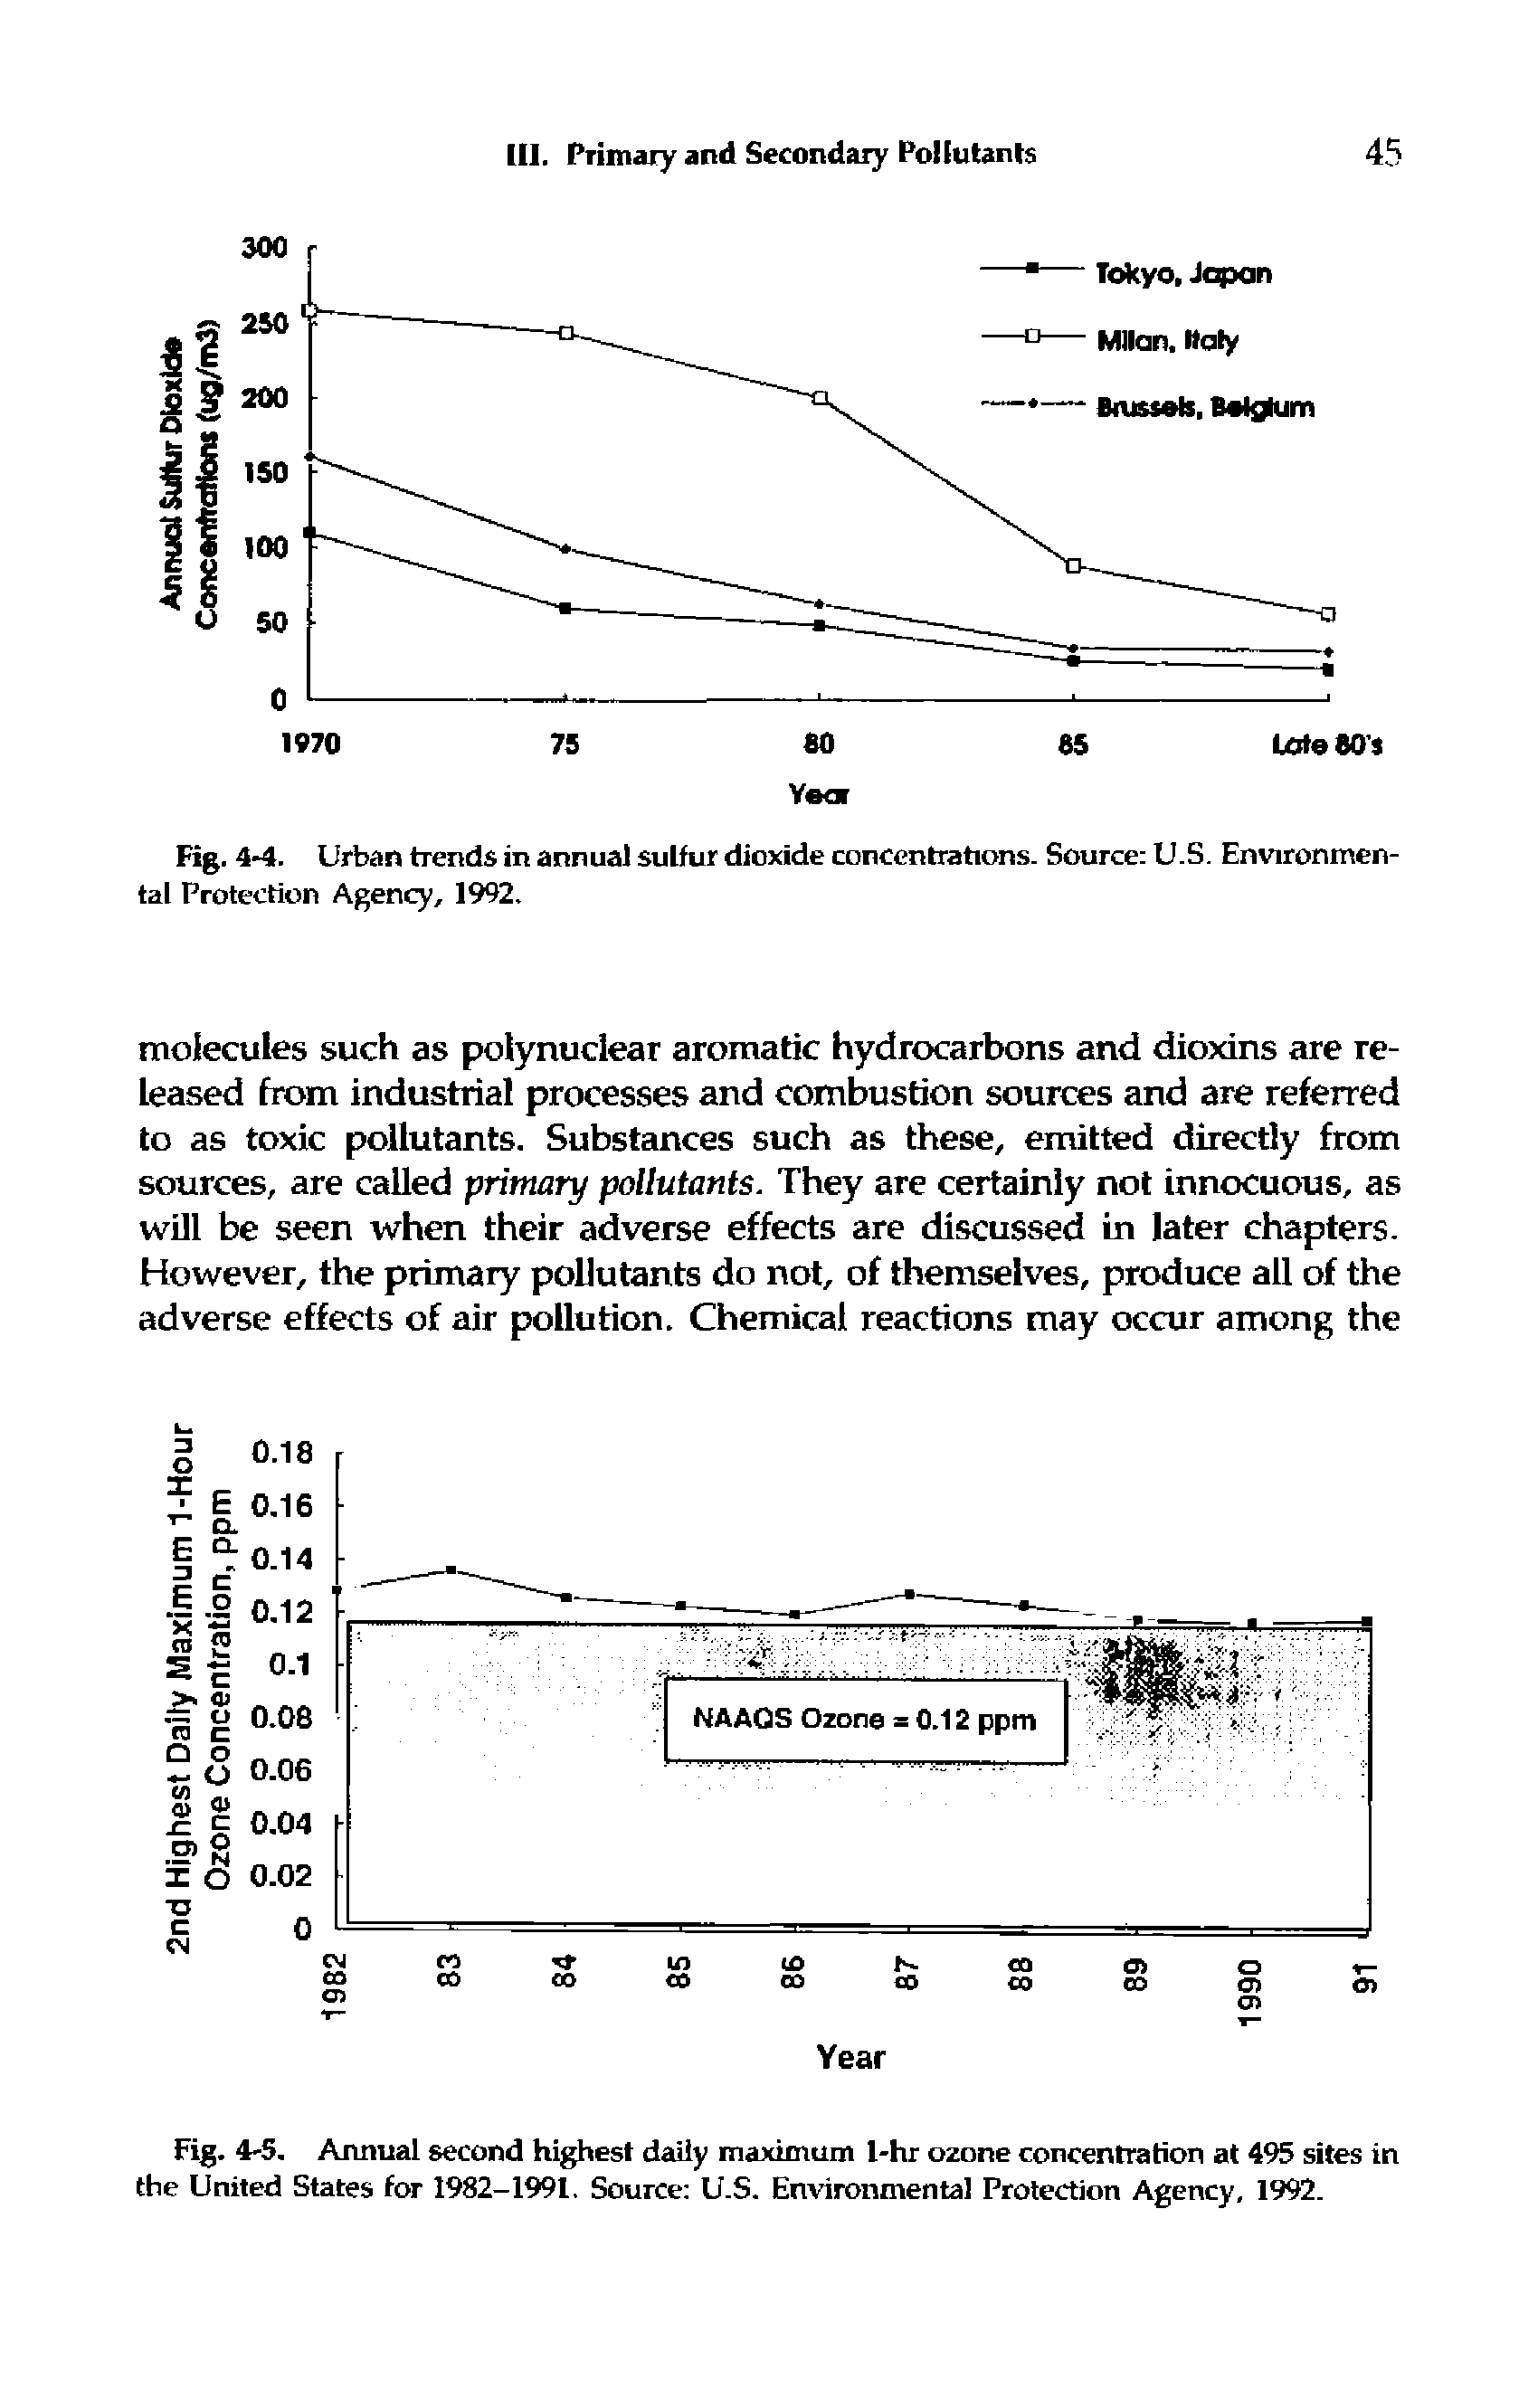 Fig. 4-5. Annual second highest daily maximam 1-hr ozone concentration at 495 sites in the United States for 1982-1991, Source U.S. Environmental Protection Agency, 1992.